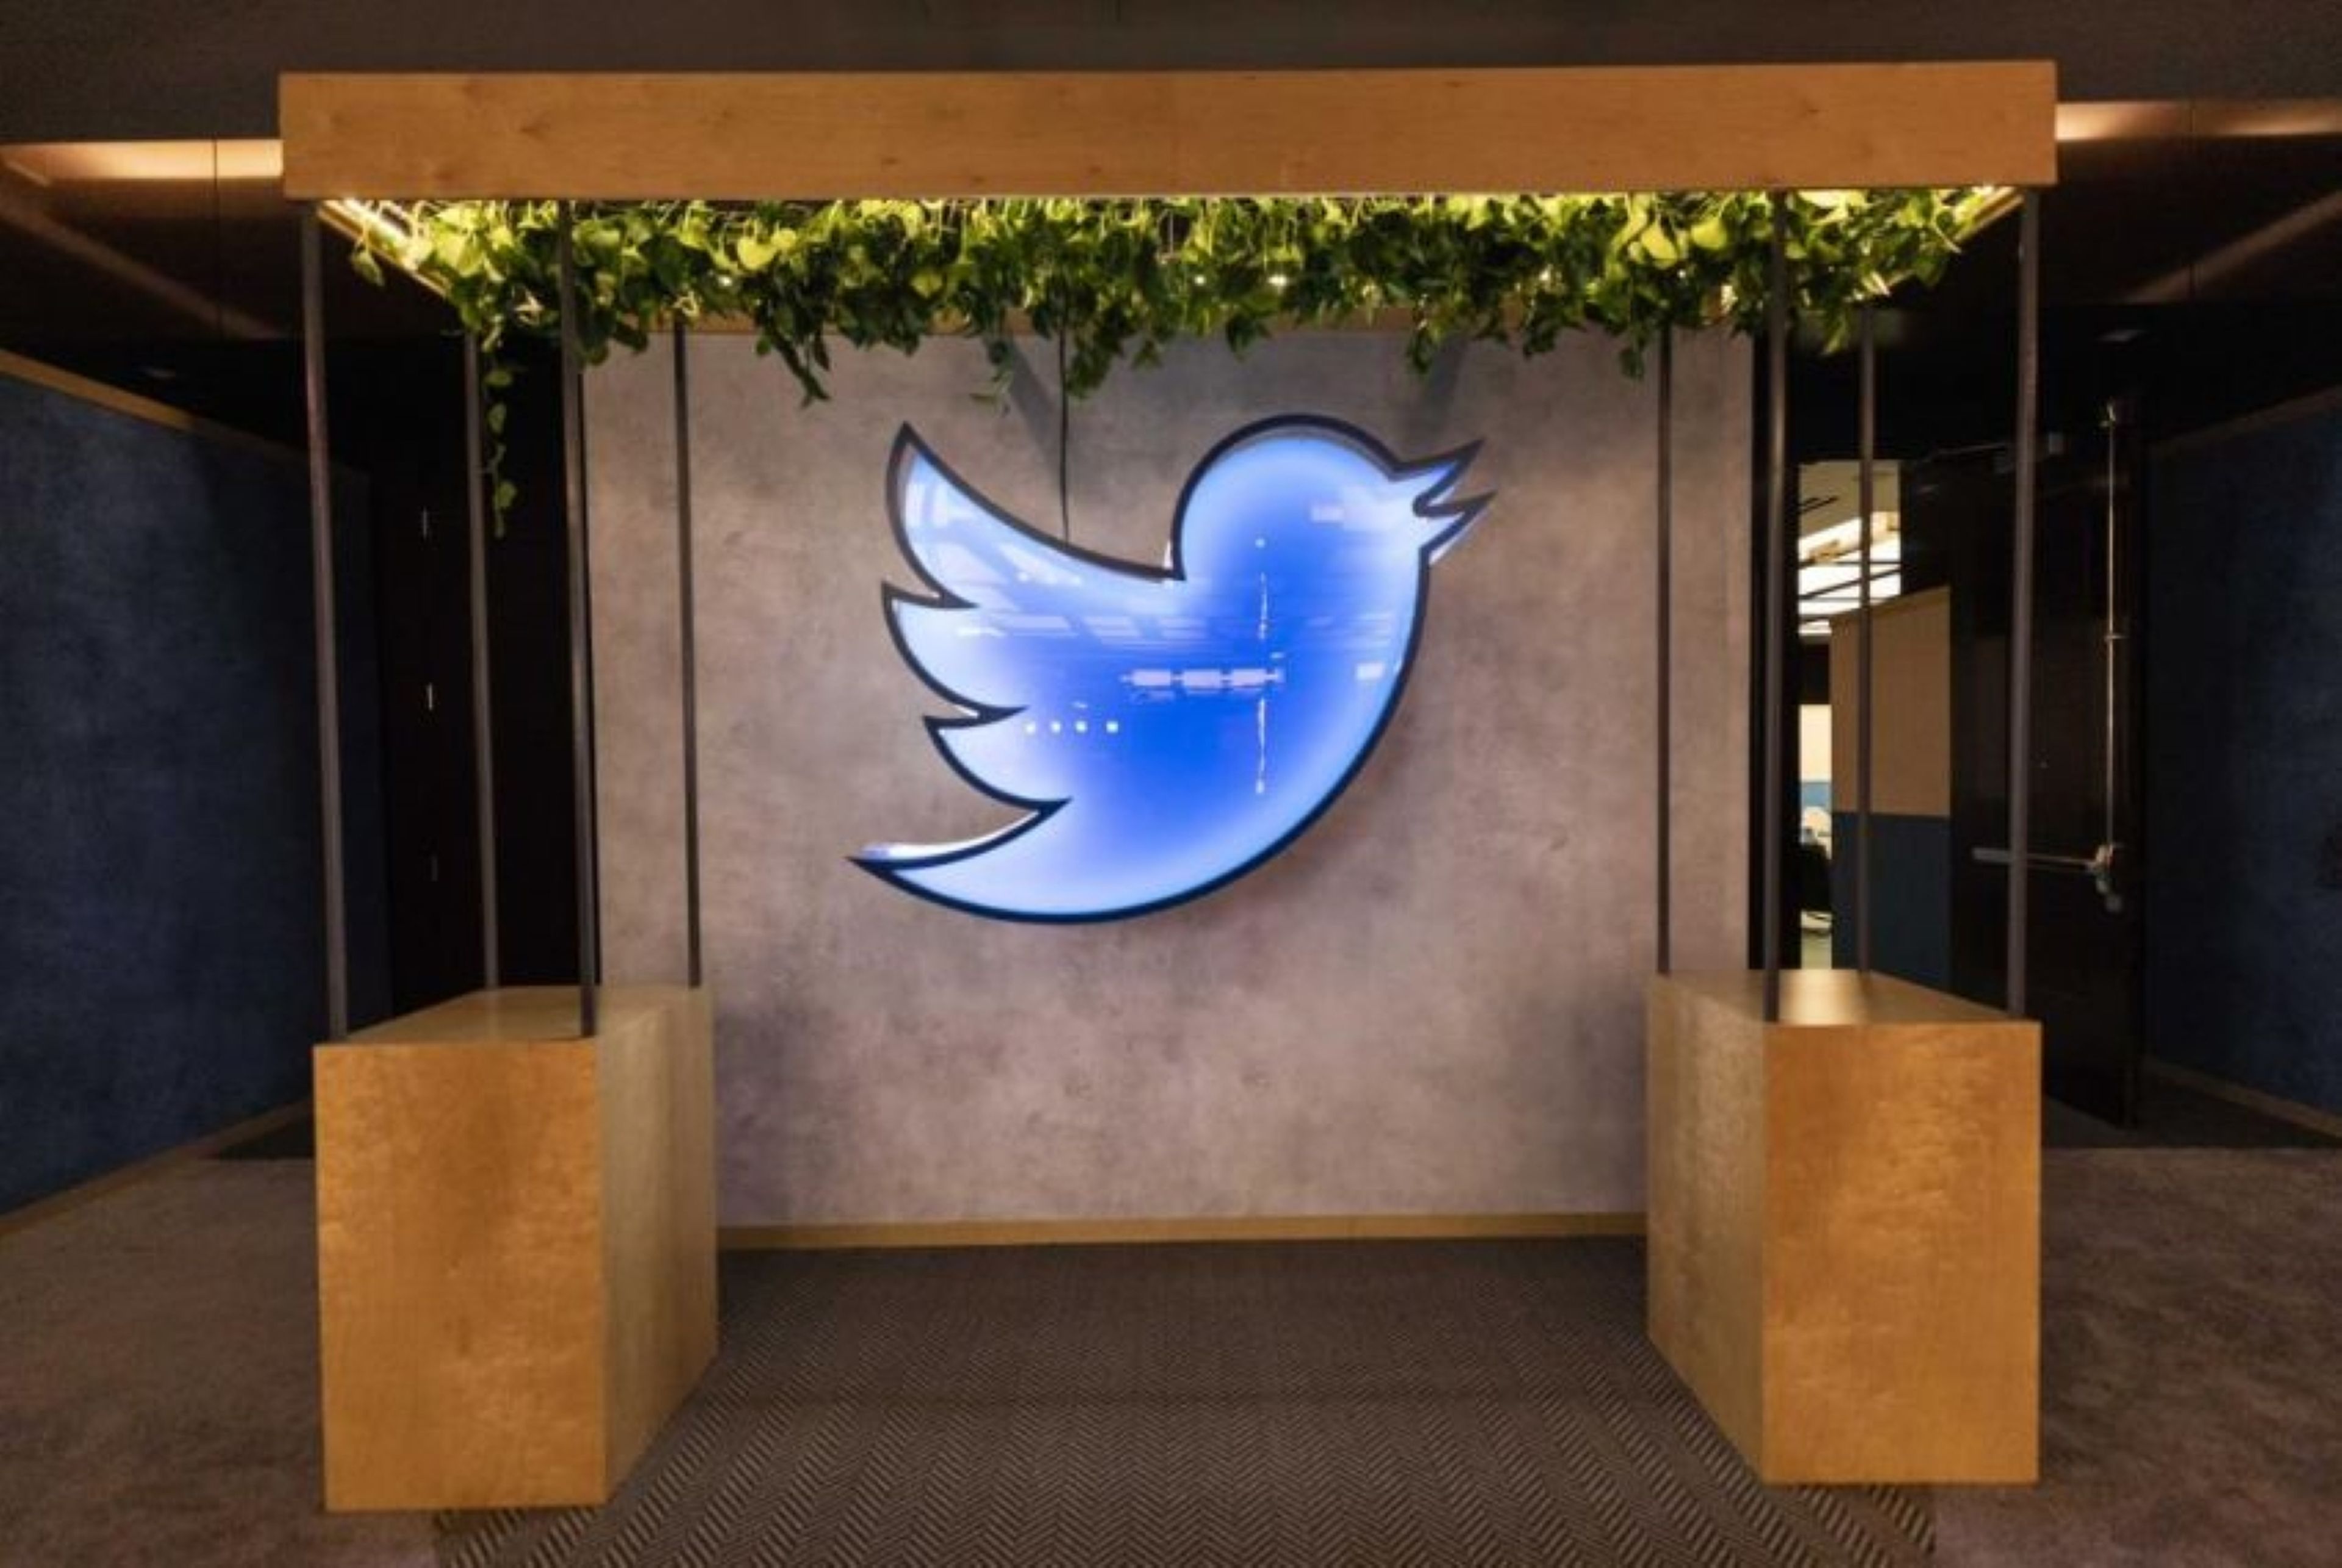 The official logo of Twitter for 50 dollars: Elon Musk empties the offices and puts everything up for sale